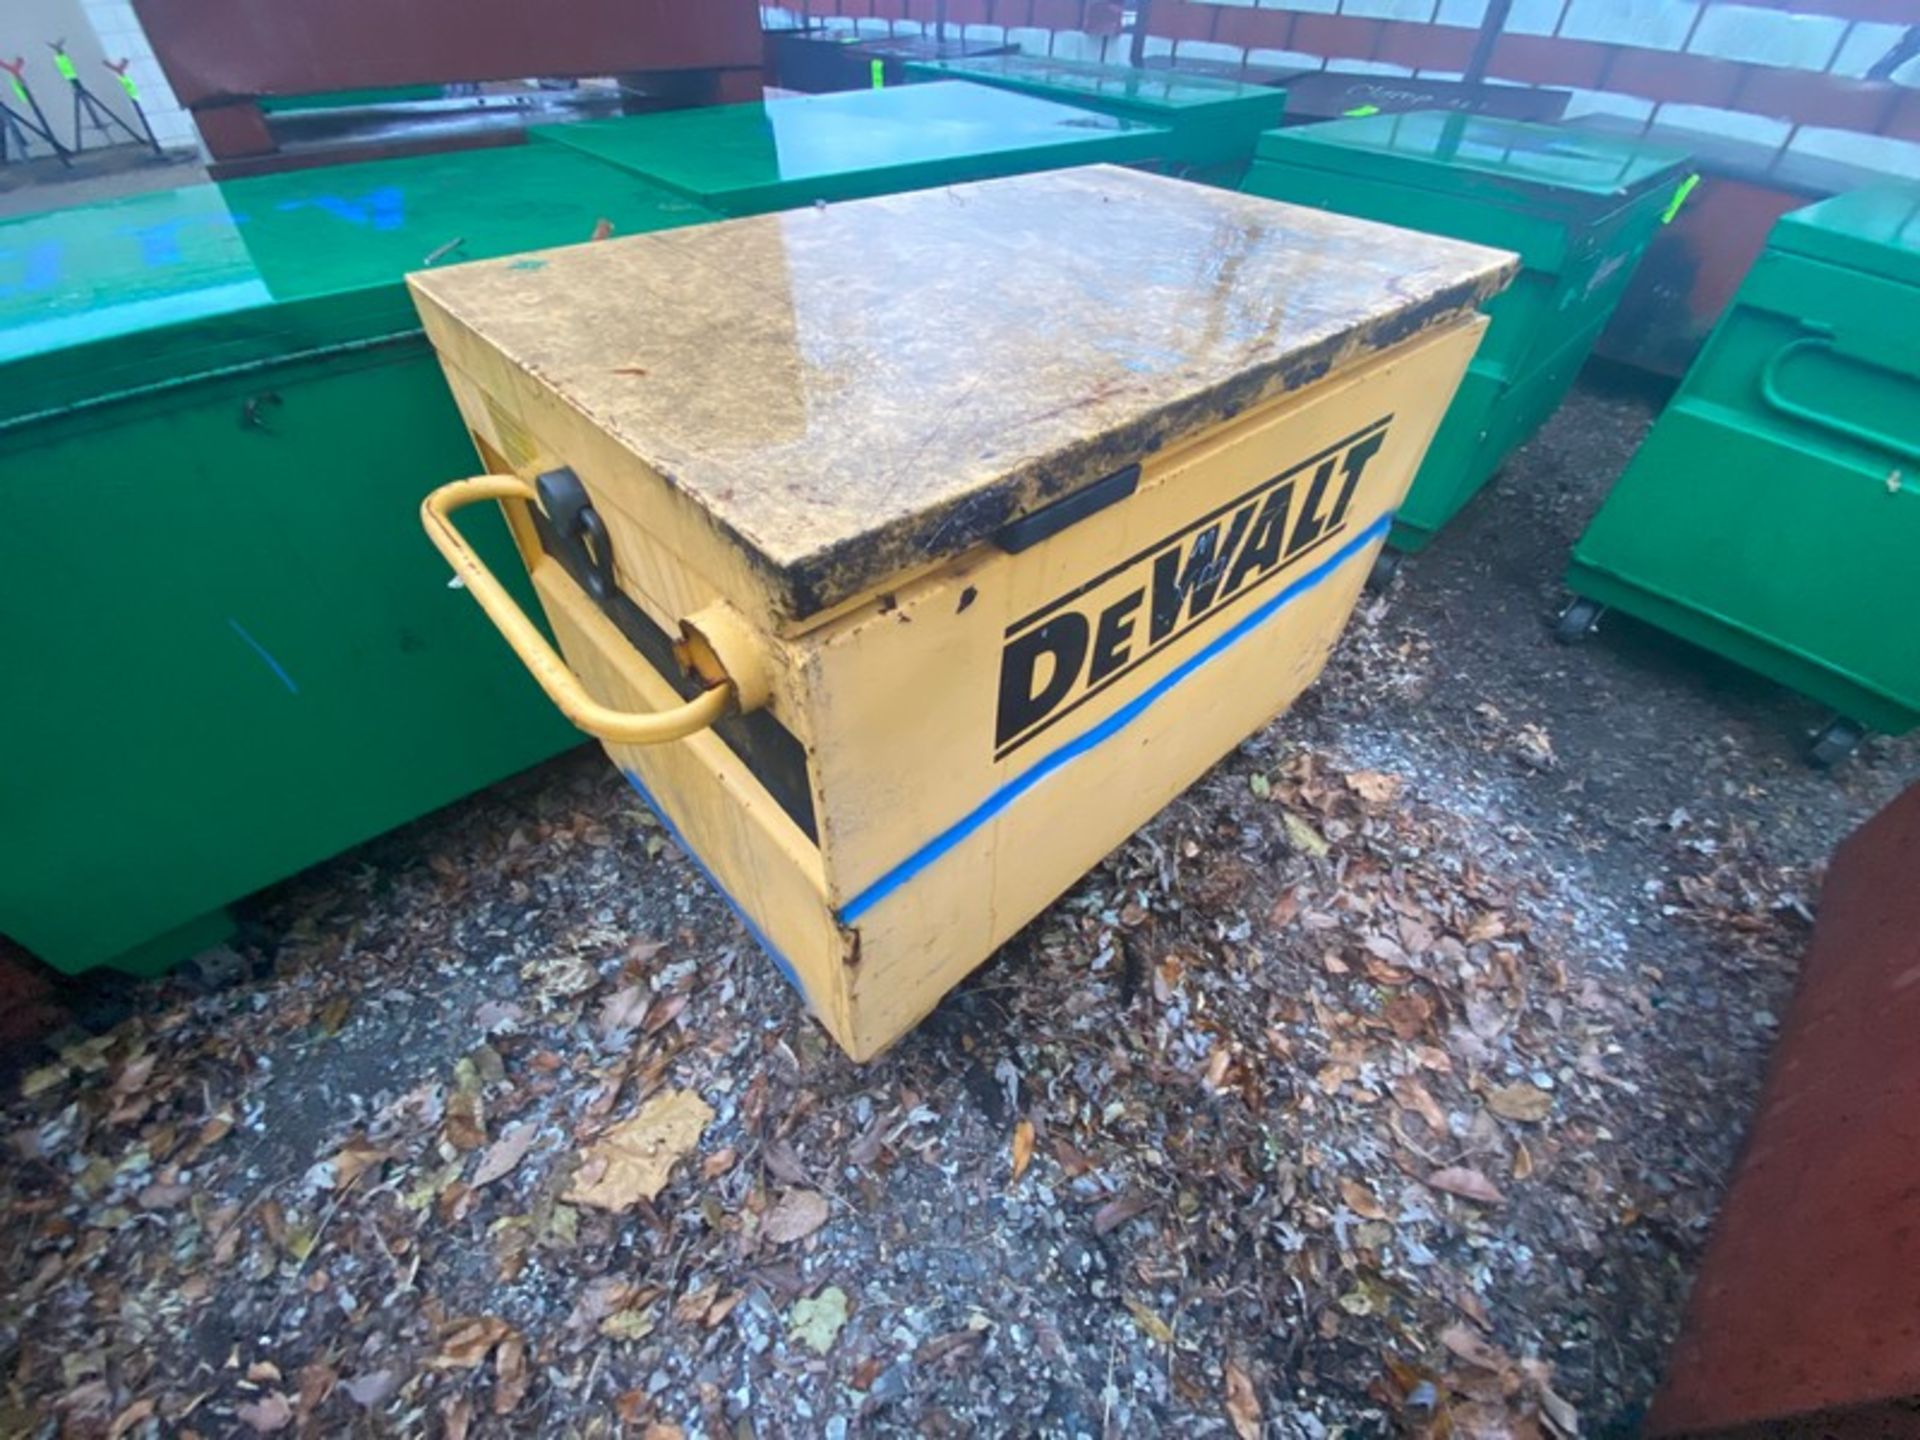 DeWalt Gang Box, with Hinge Lid, Overall Dims.: Aprox. 50” L x 32” W x 34” H, with Handles & Mounted - Image 2 of 3